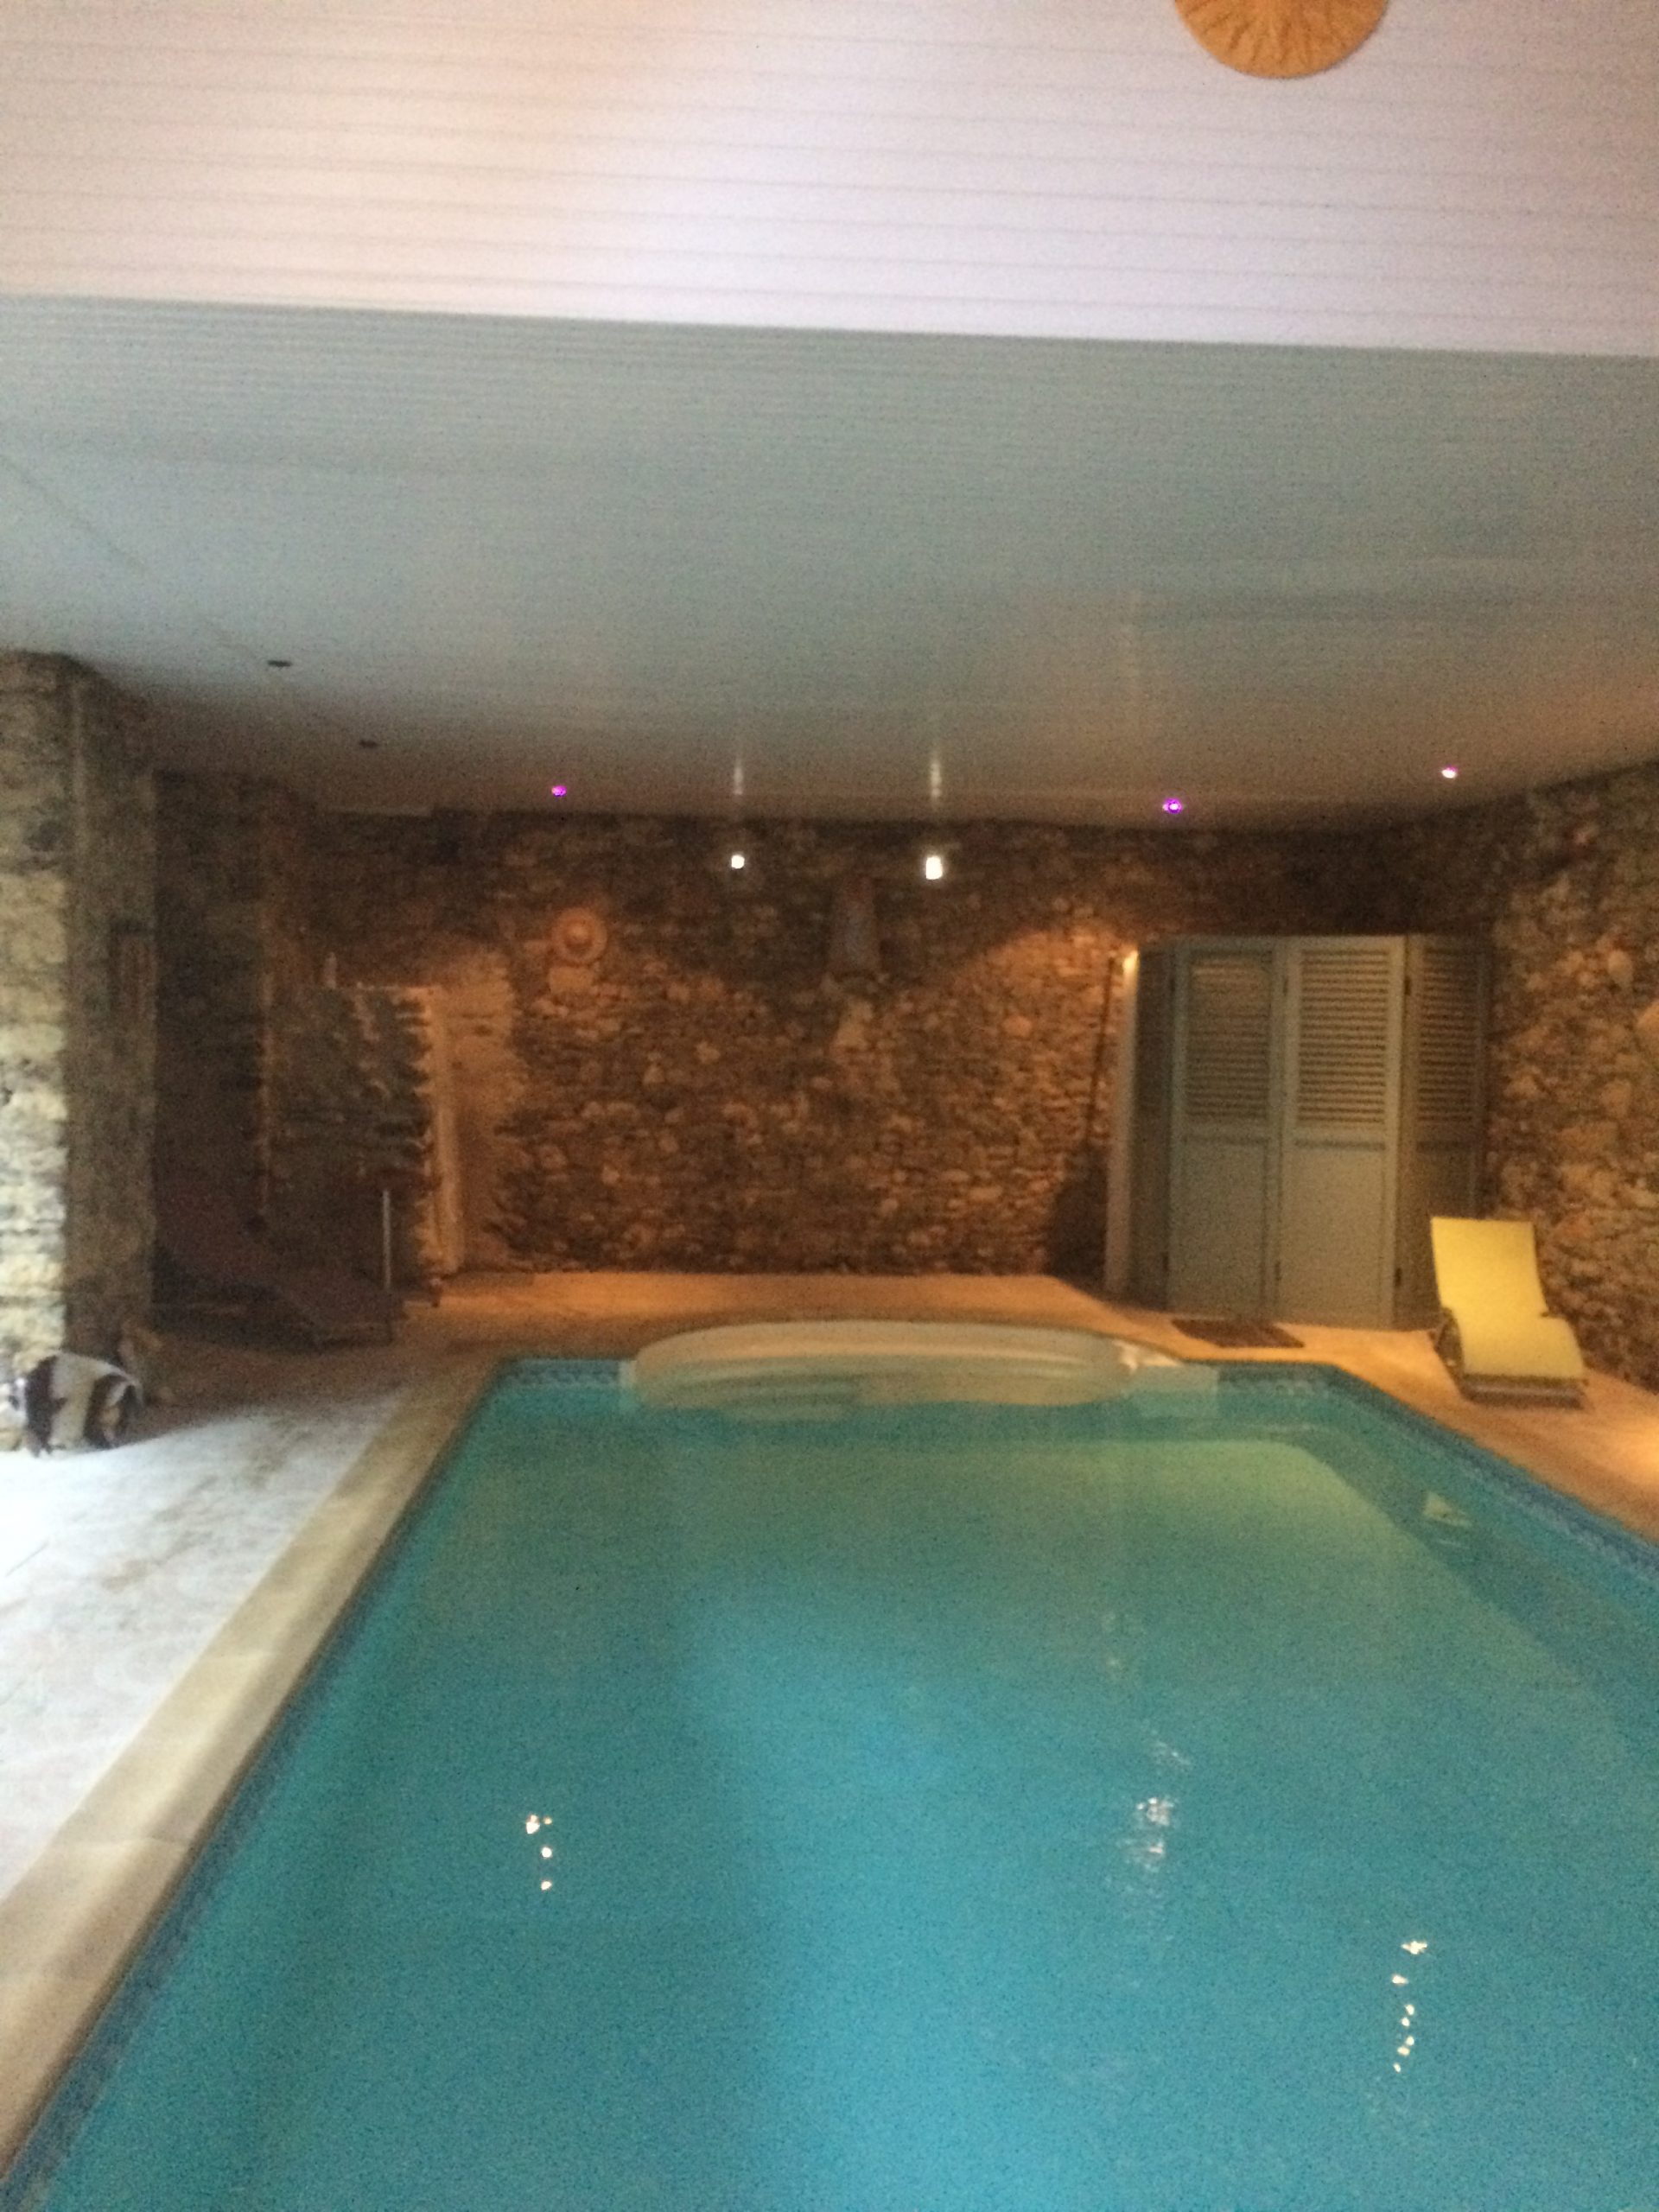 MAGNIFICENT XVIth-CENTURY PRESBYTERY WITH INTERIOR SWIMMING POOL AND GITE